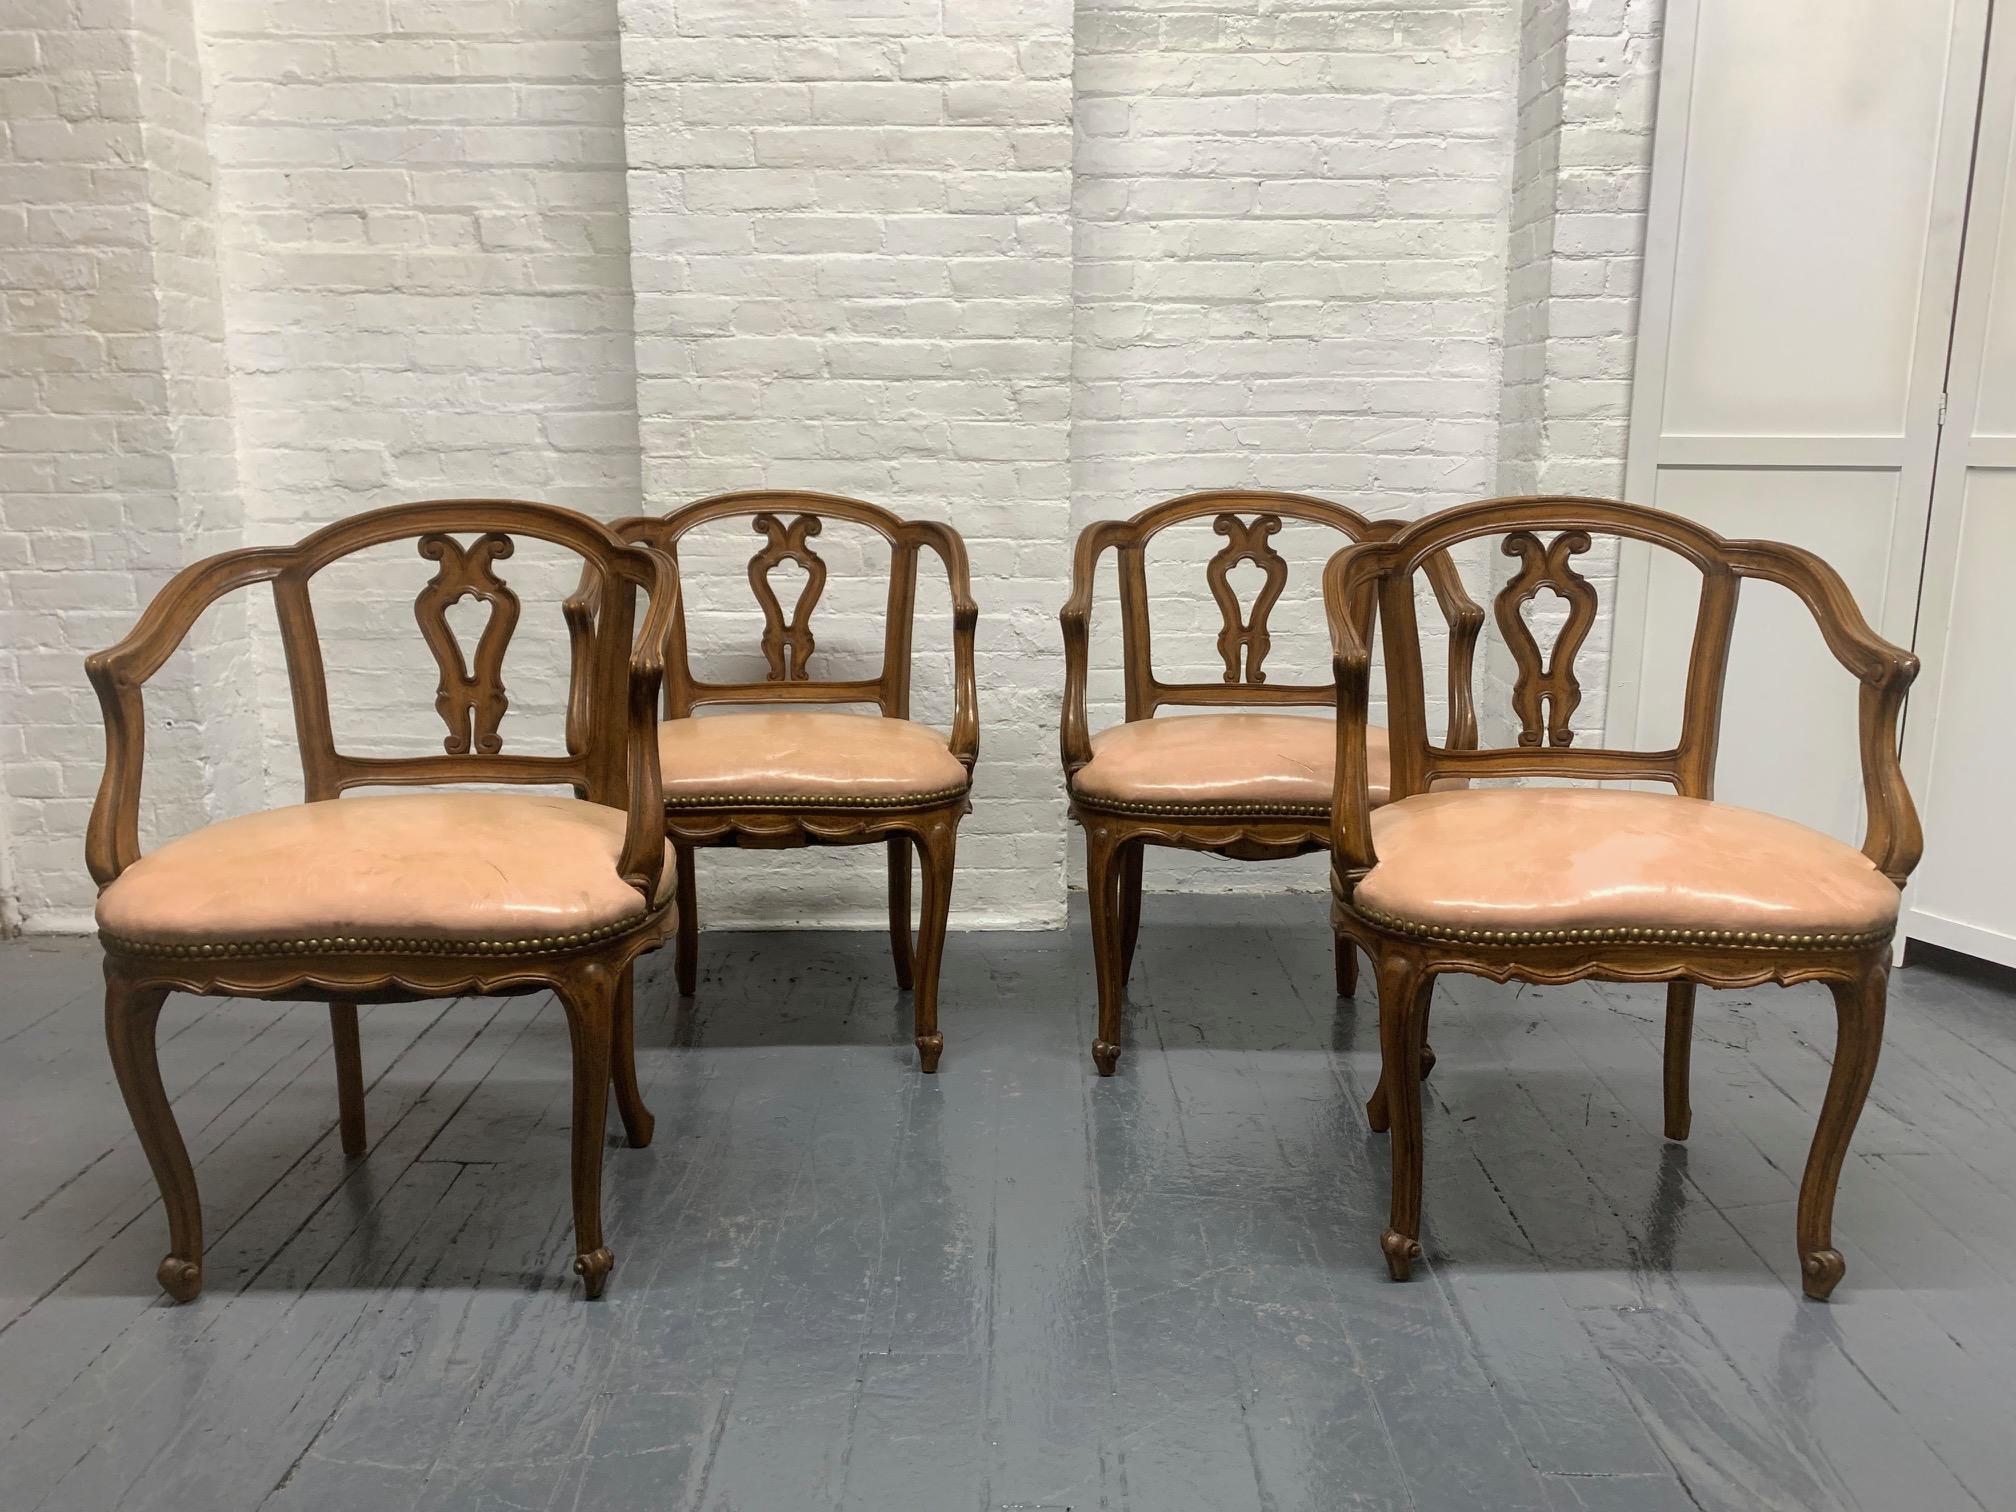 Set of four antique dining chairs. The chairs have a solid walnut frame with original leather seats. Chairs are low enough for breakfast chairs. Louis XV style.